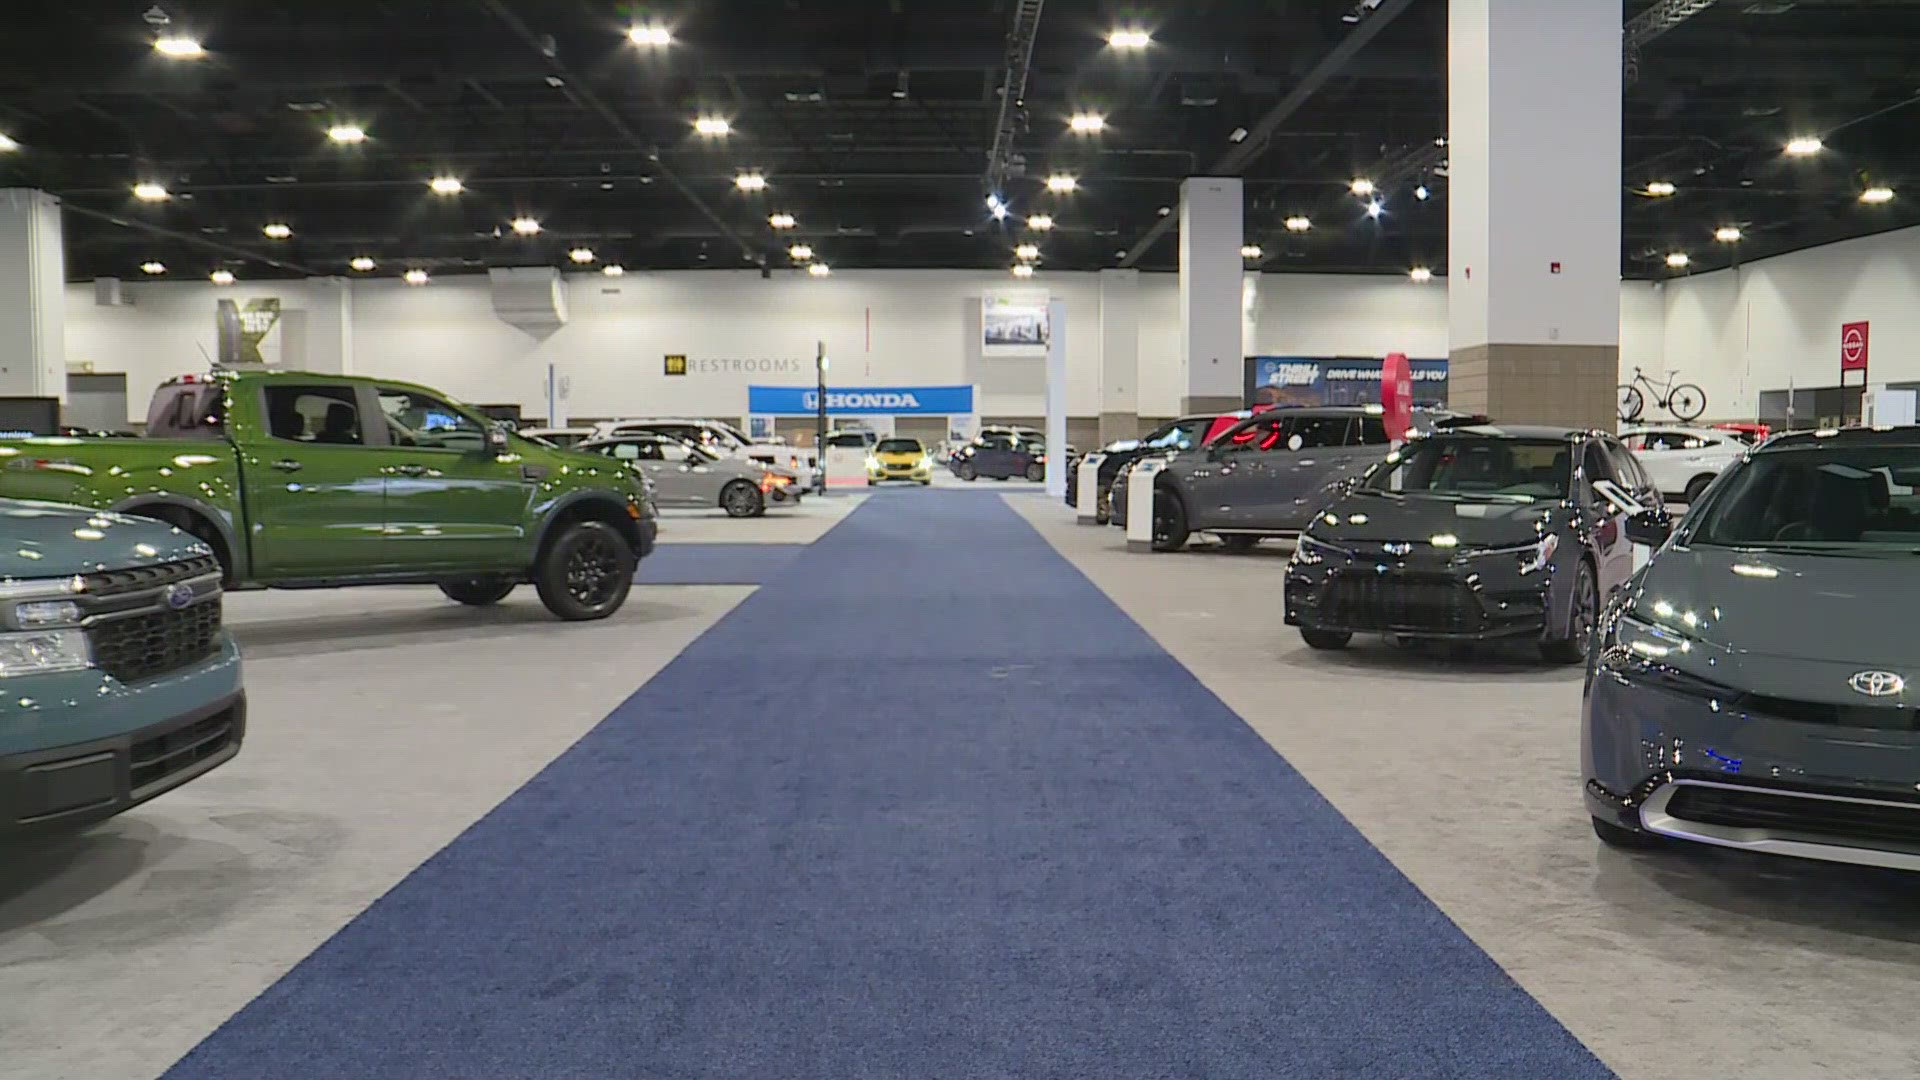 For the first time since 2019, the Denver Auto Show is back at the Colorado Convention Center from Wednesday through Sunday.